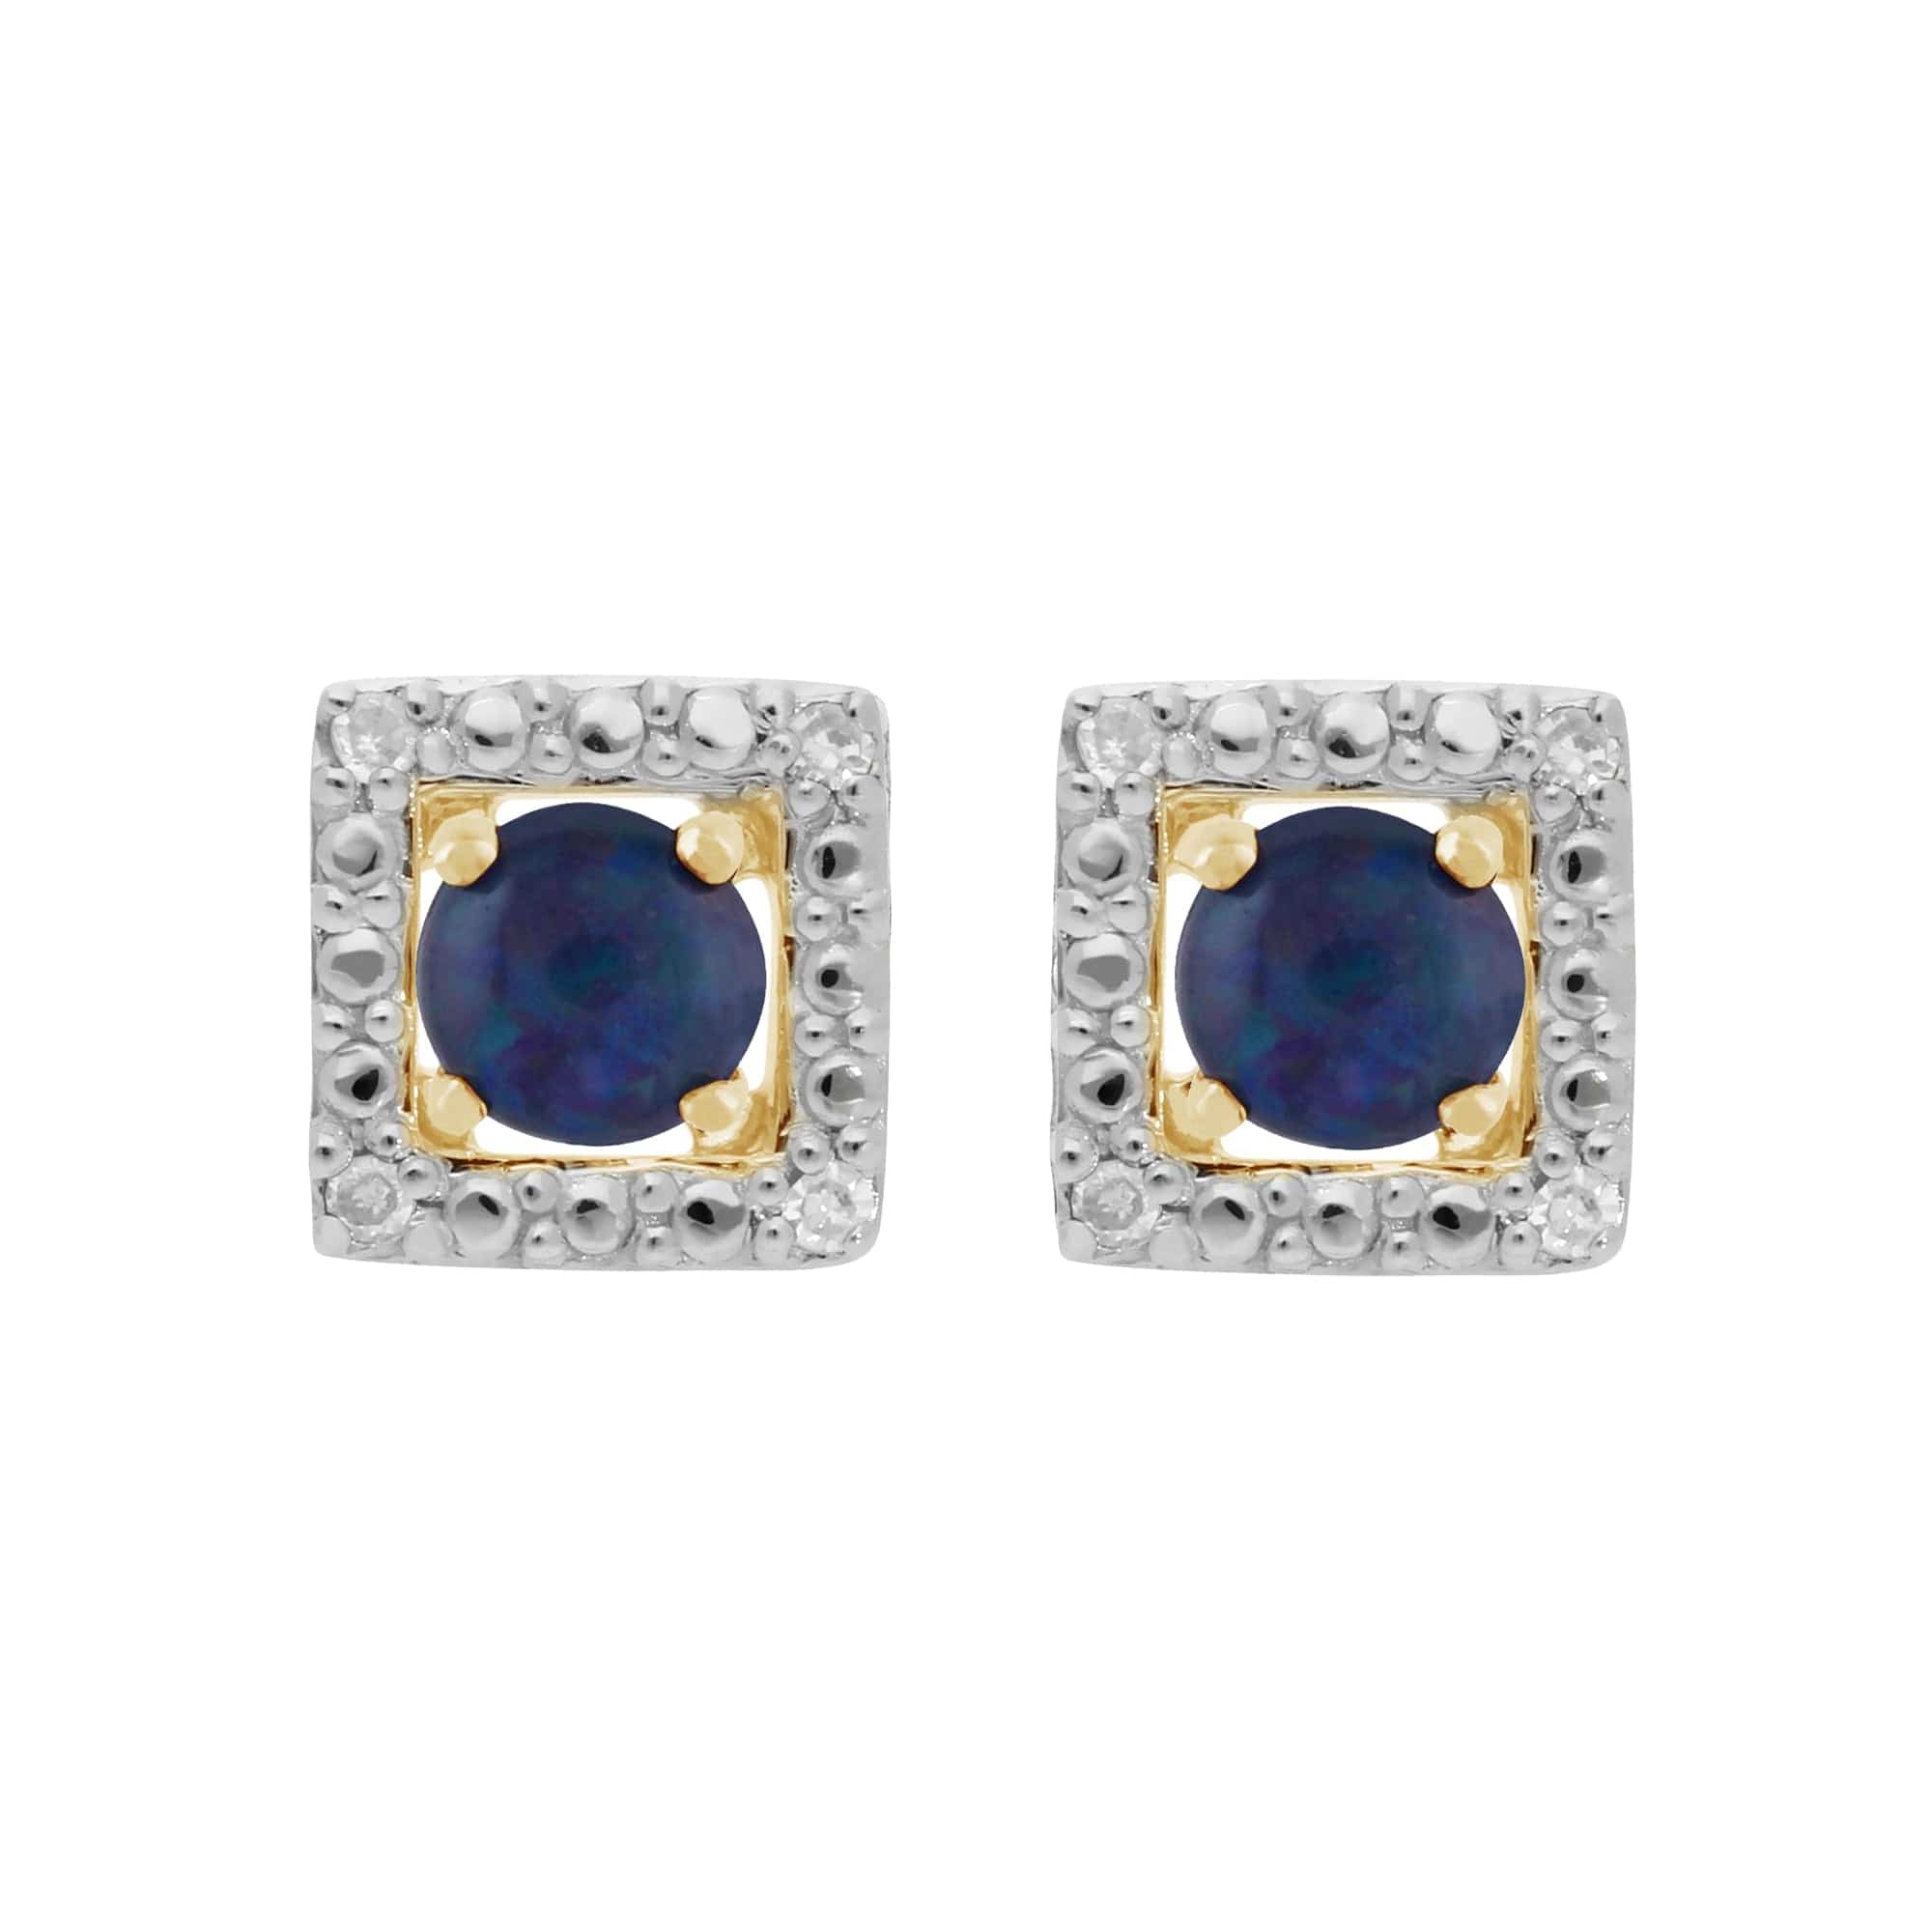 183E0083379-191E0379019 Classic Round Triplet Opal Stud Earrings with Detachable Diamond Square Earrings Jacket Set in 9ct Yellow Gold 1